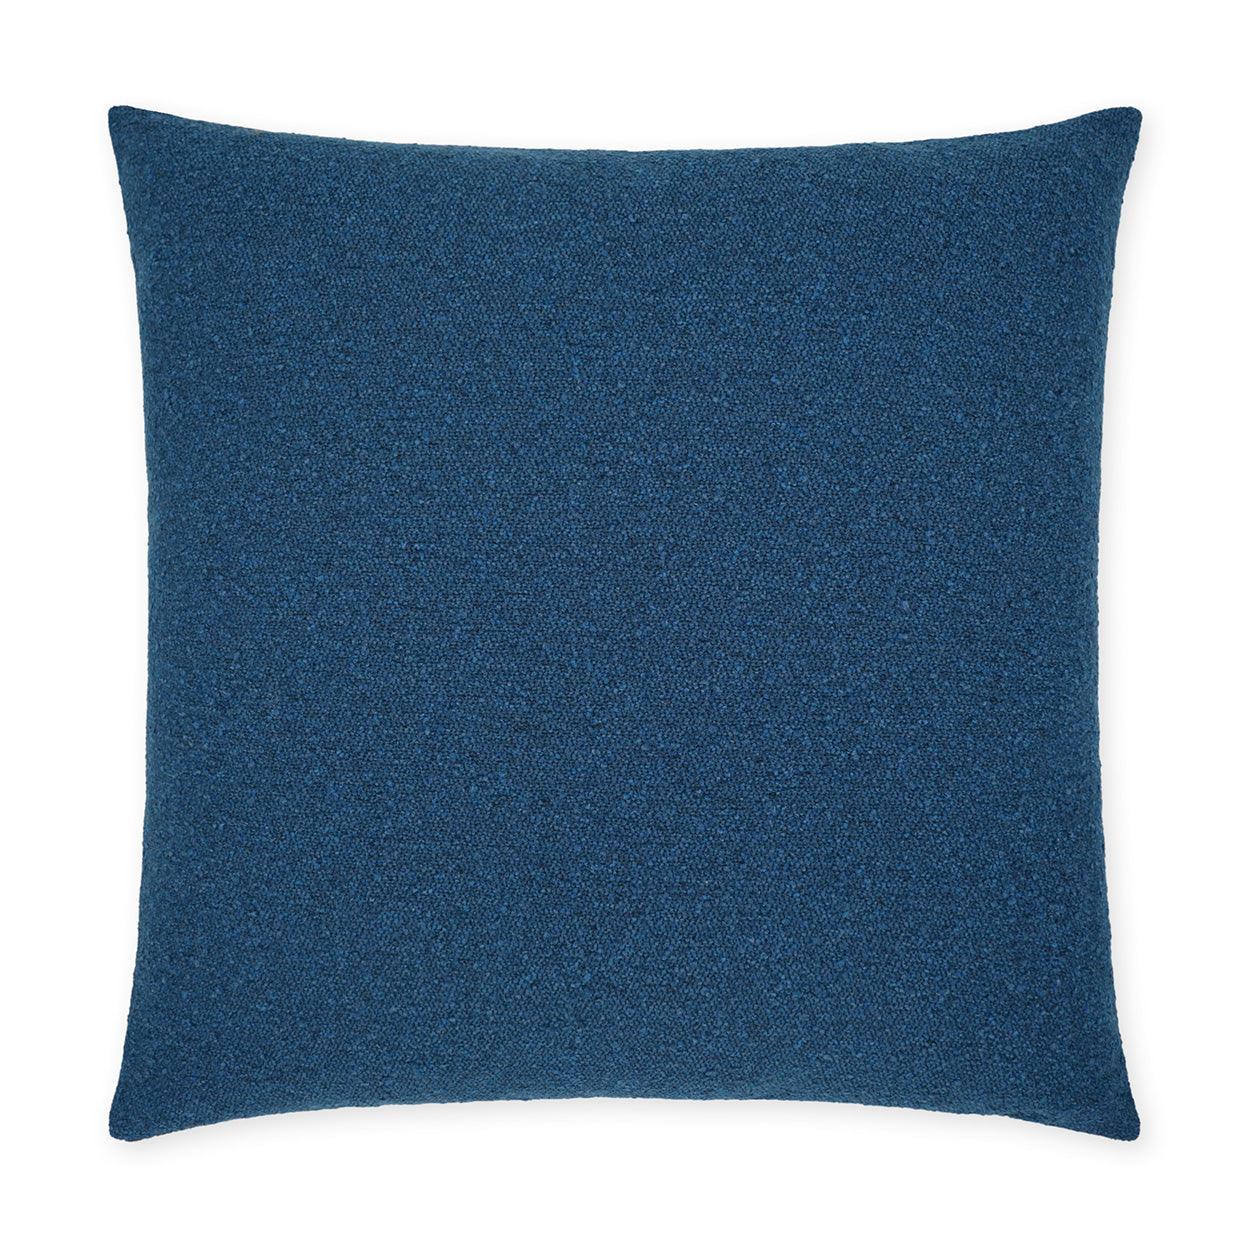 Beyond Blue Solid Textured Blue Large Throw Pillow With Insert - Uptown Sebastian